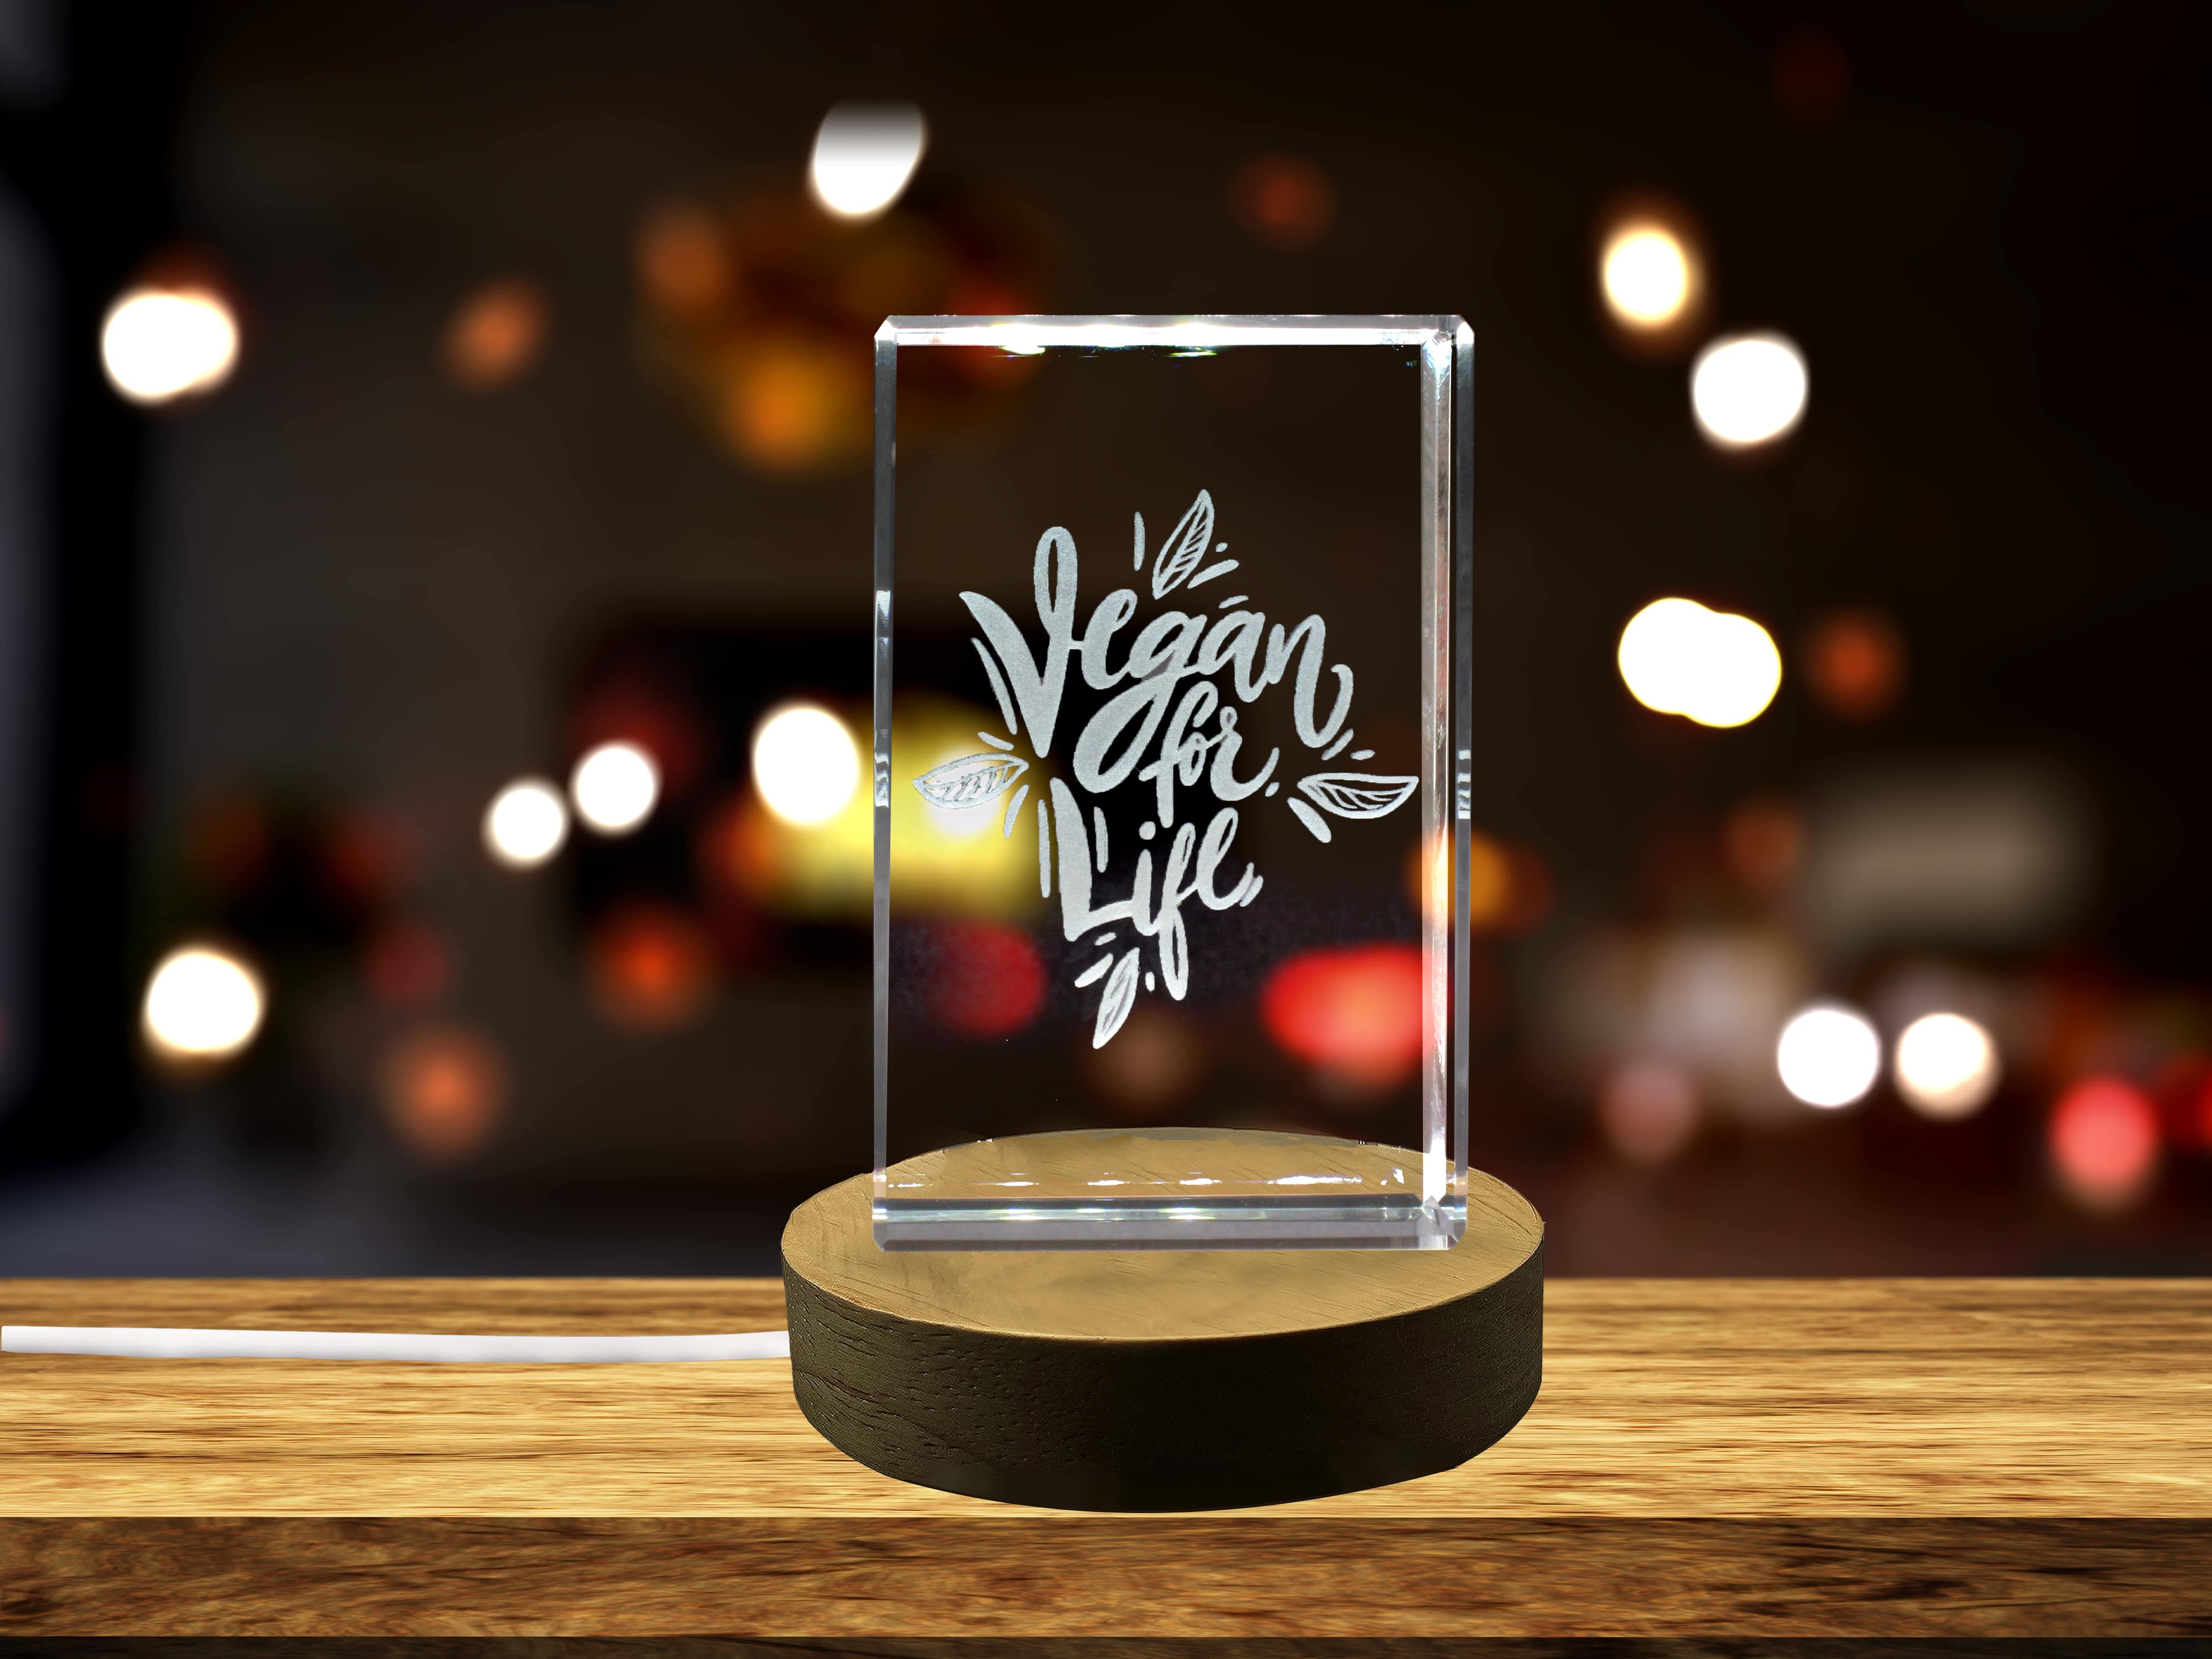 Vegan for Life Hand Drawn 3D Engraved Crystal 3D Engraved Crystal Keepsake/Gift/Decor/Collectible/Souvenir A&B Crystal Collection